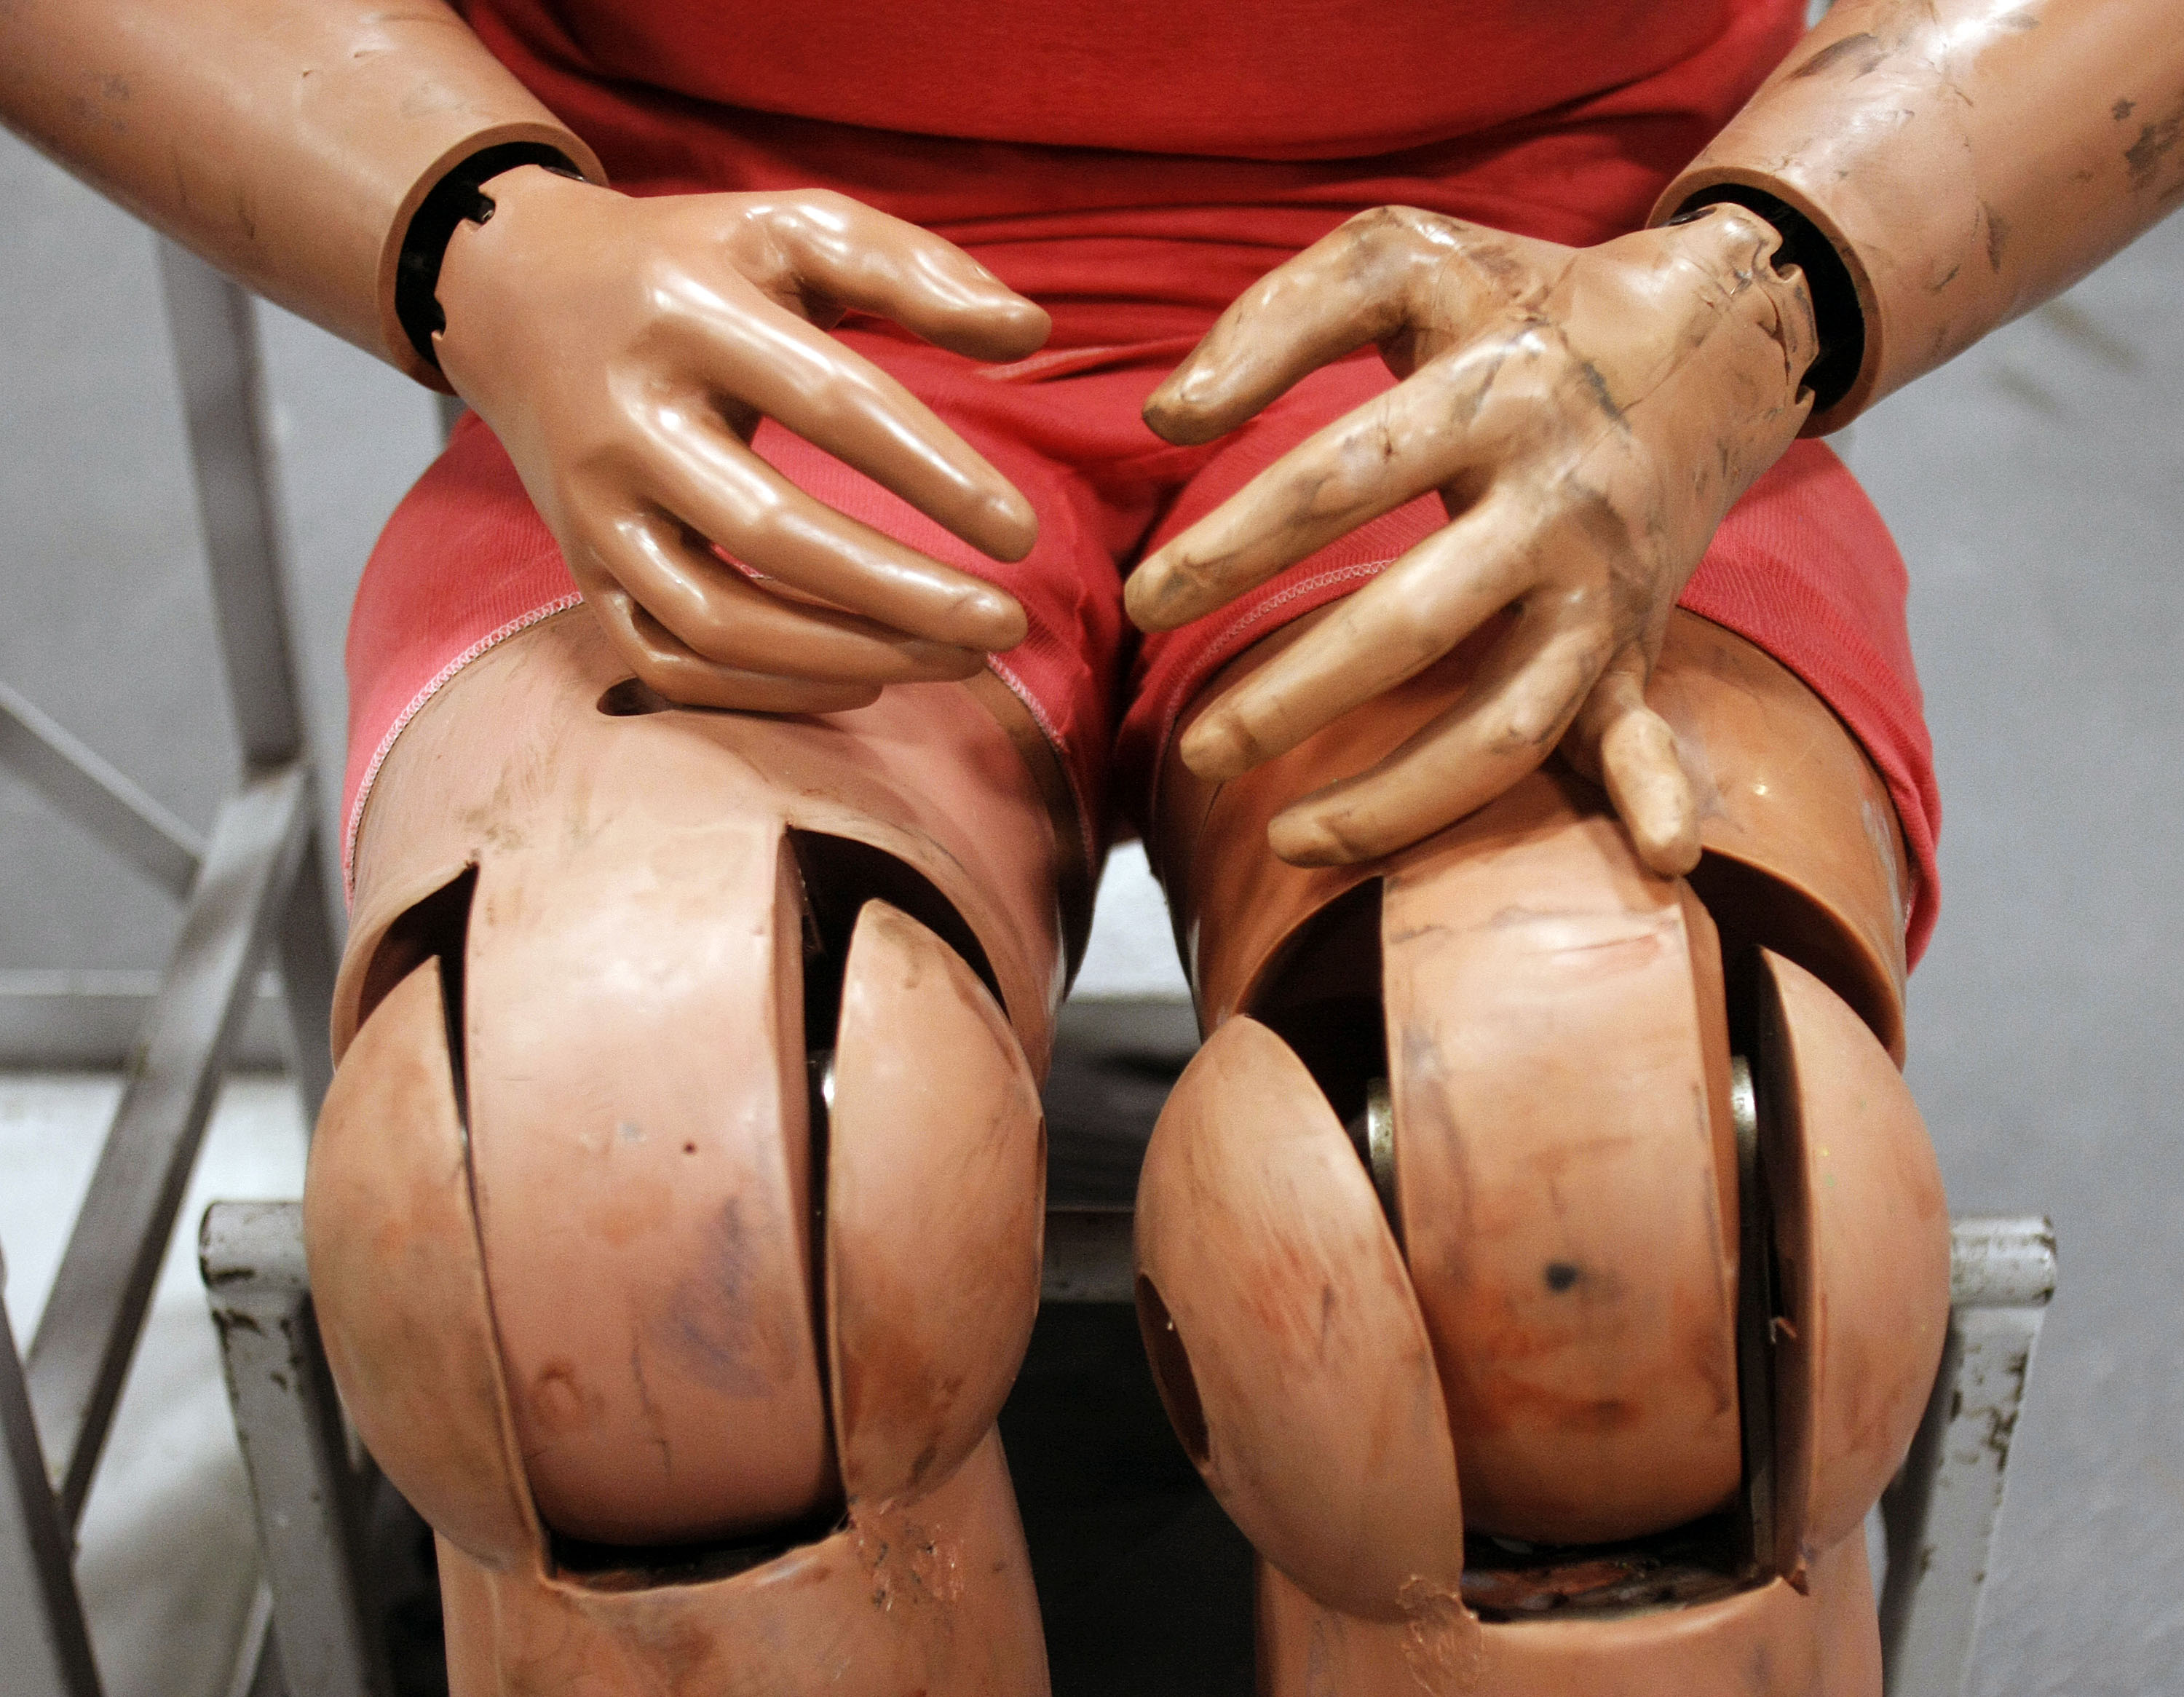 A Ford crash test dummy is shown at the Crash Barrier Dearborn Development Center March 10, 2014 in Dearborn, Michigan. (Bill Pugliano&mdash;Getty Images)